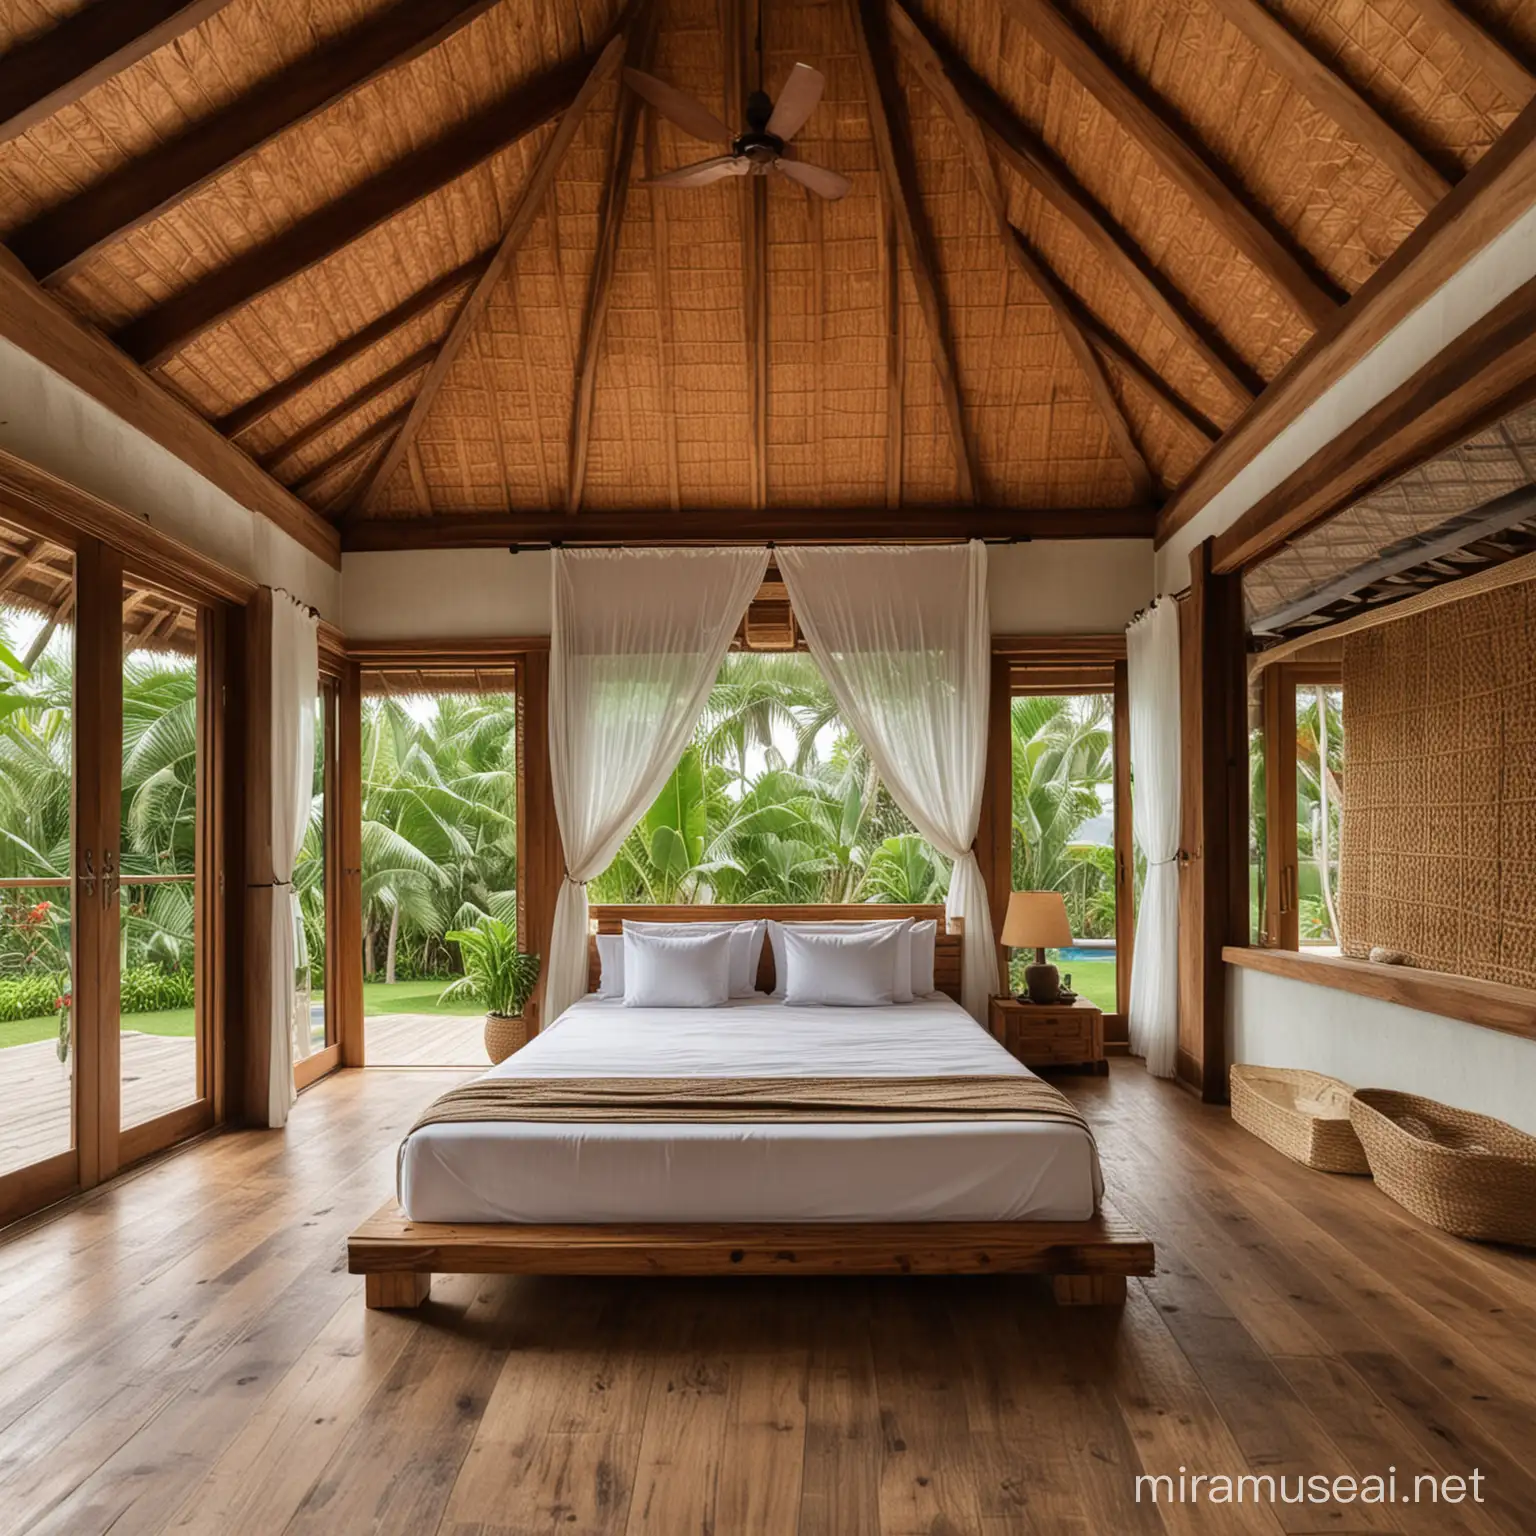 Bali style empty bedroom without bed and other furniture, wood roof.